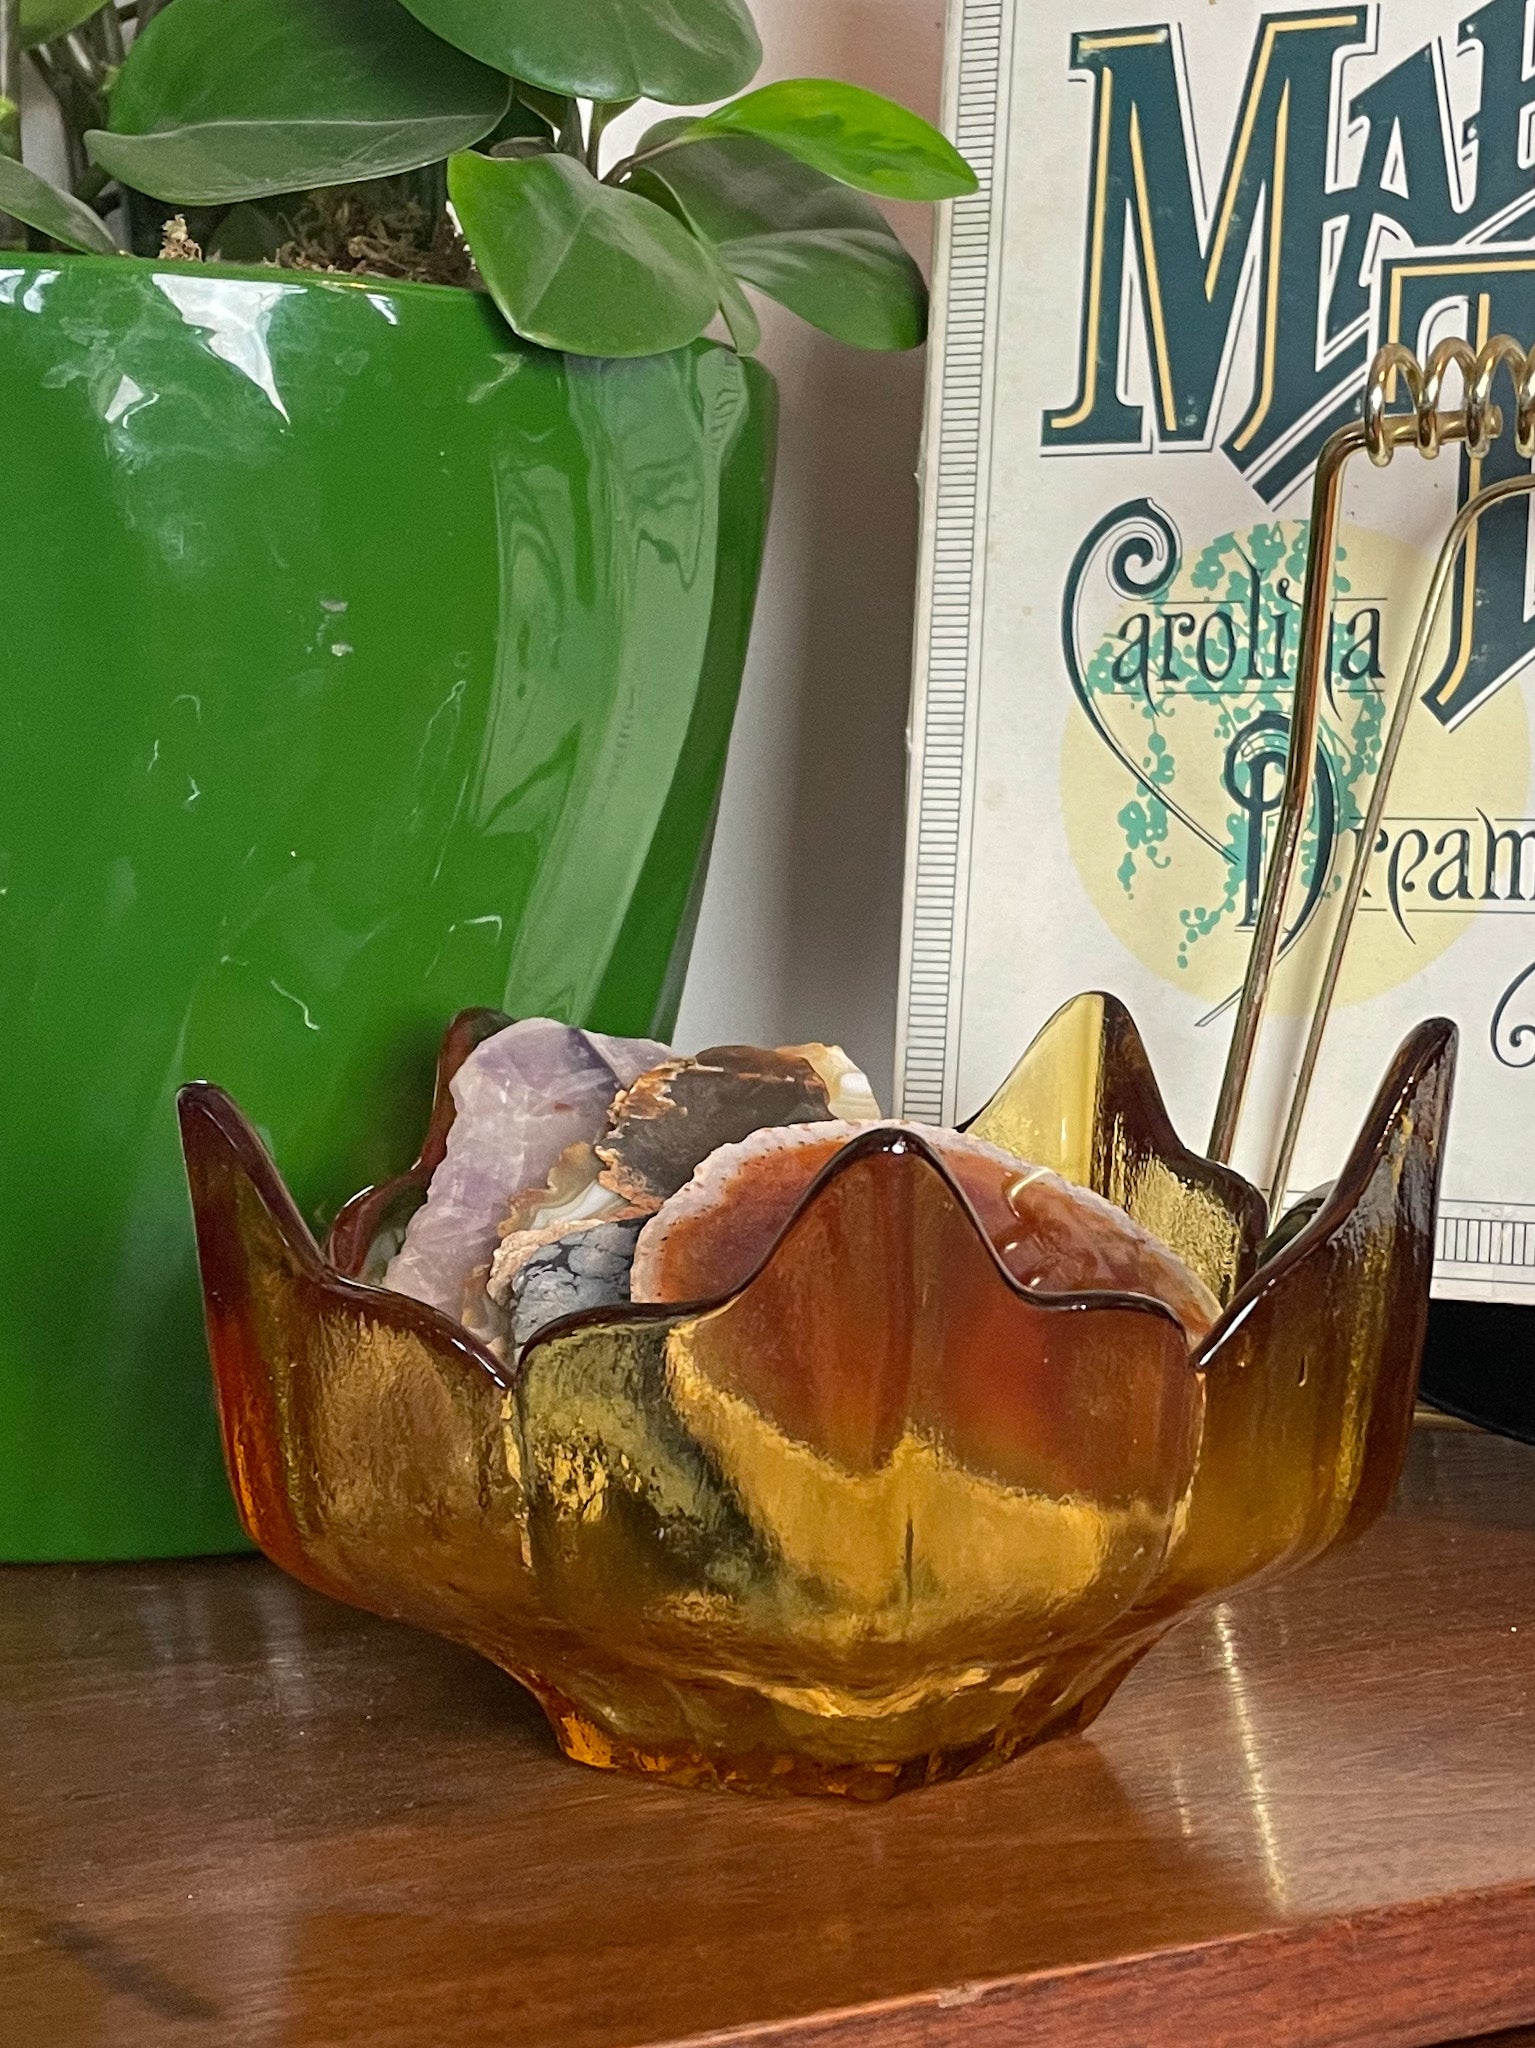 Crystal Glass Lotus Decorative Bowl With Stand Amber